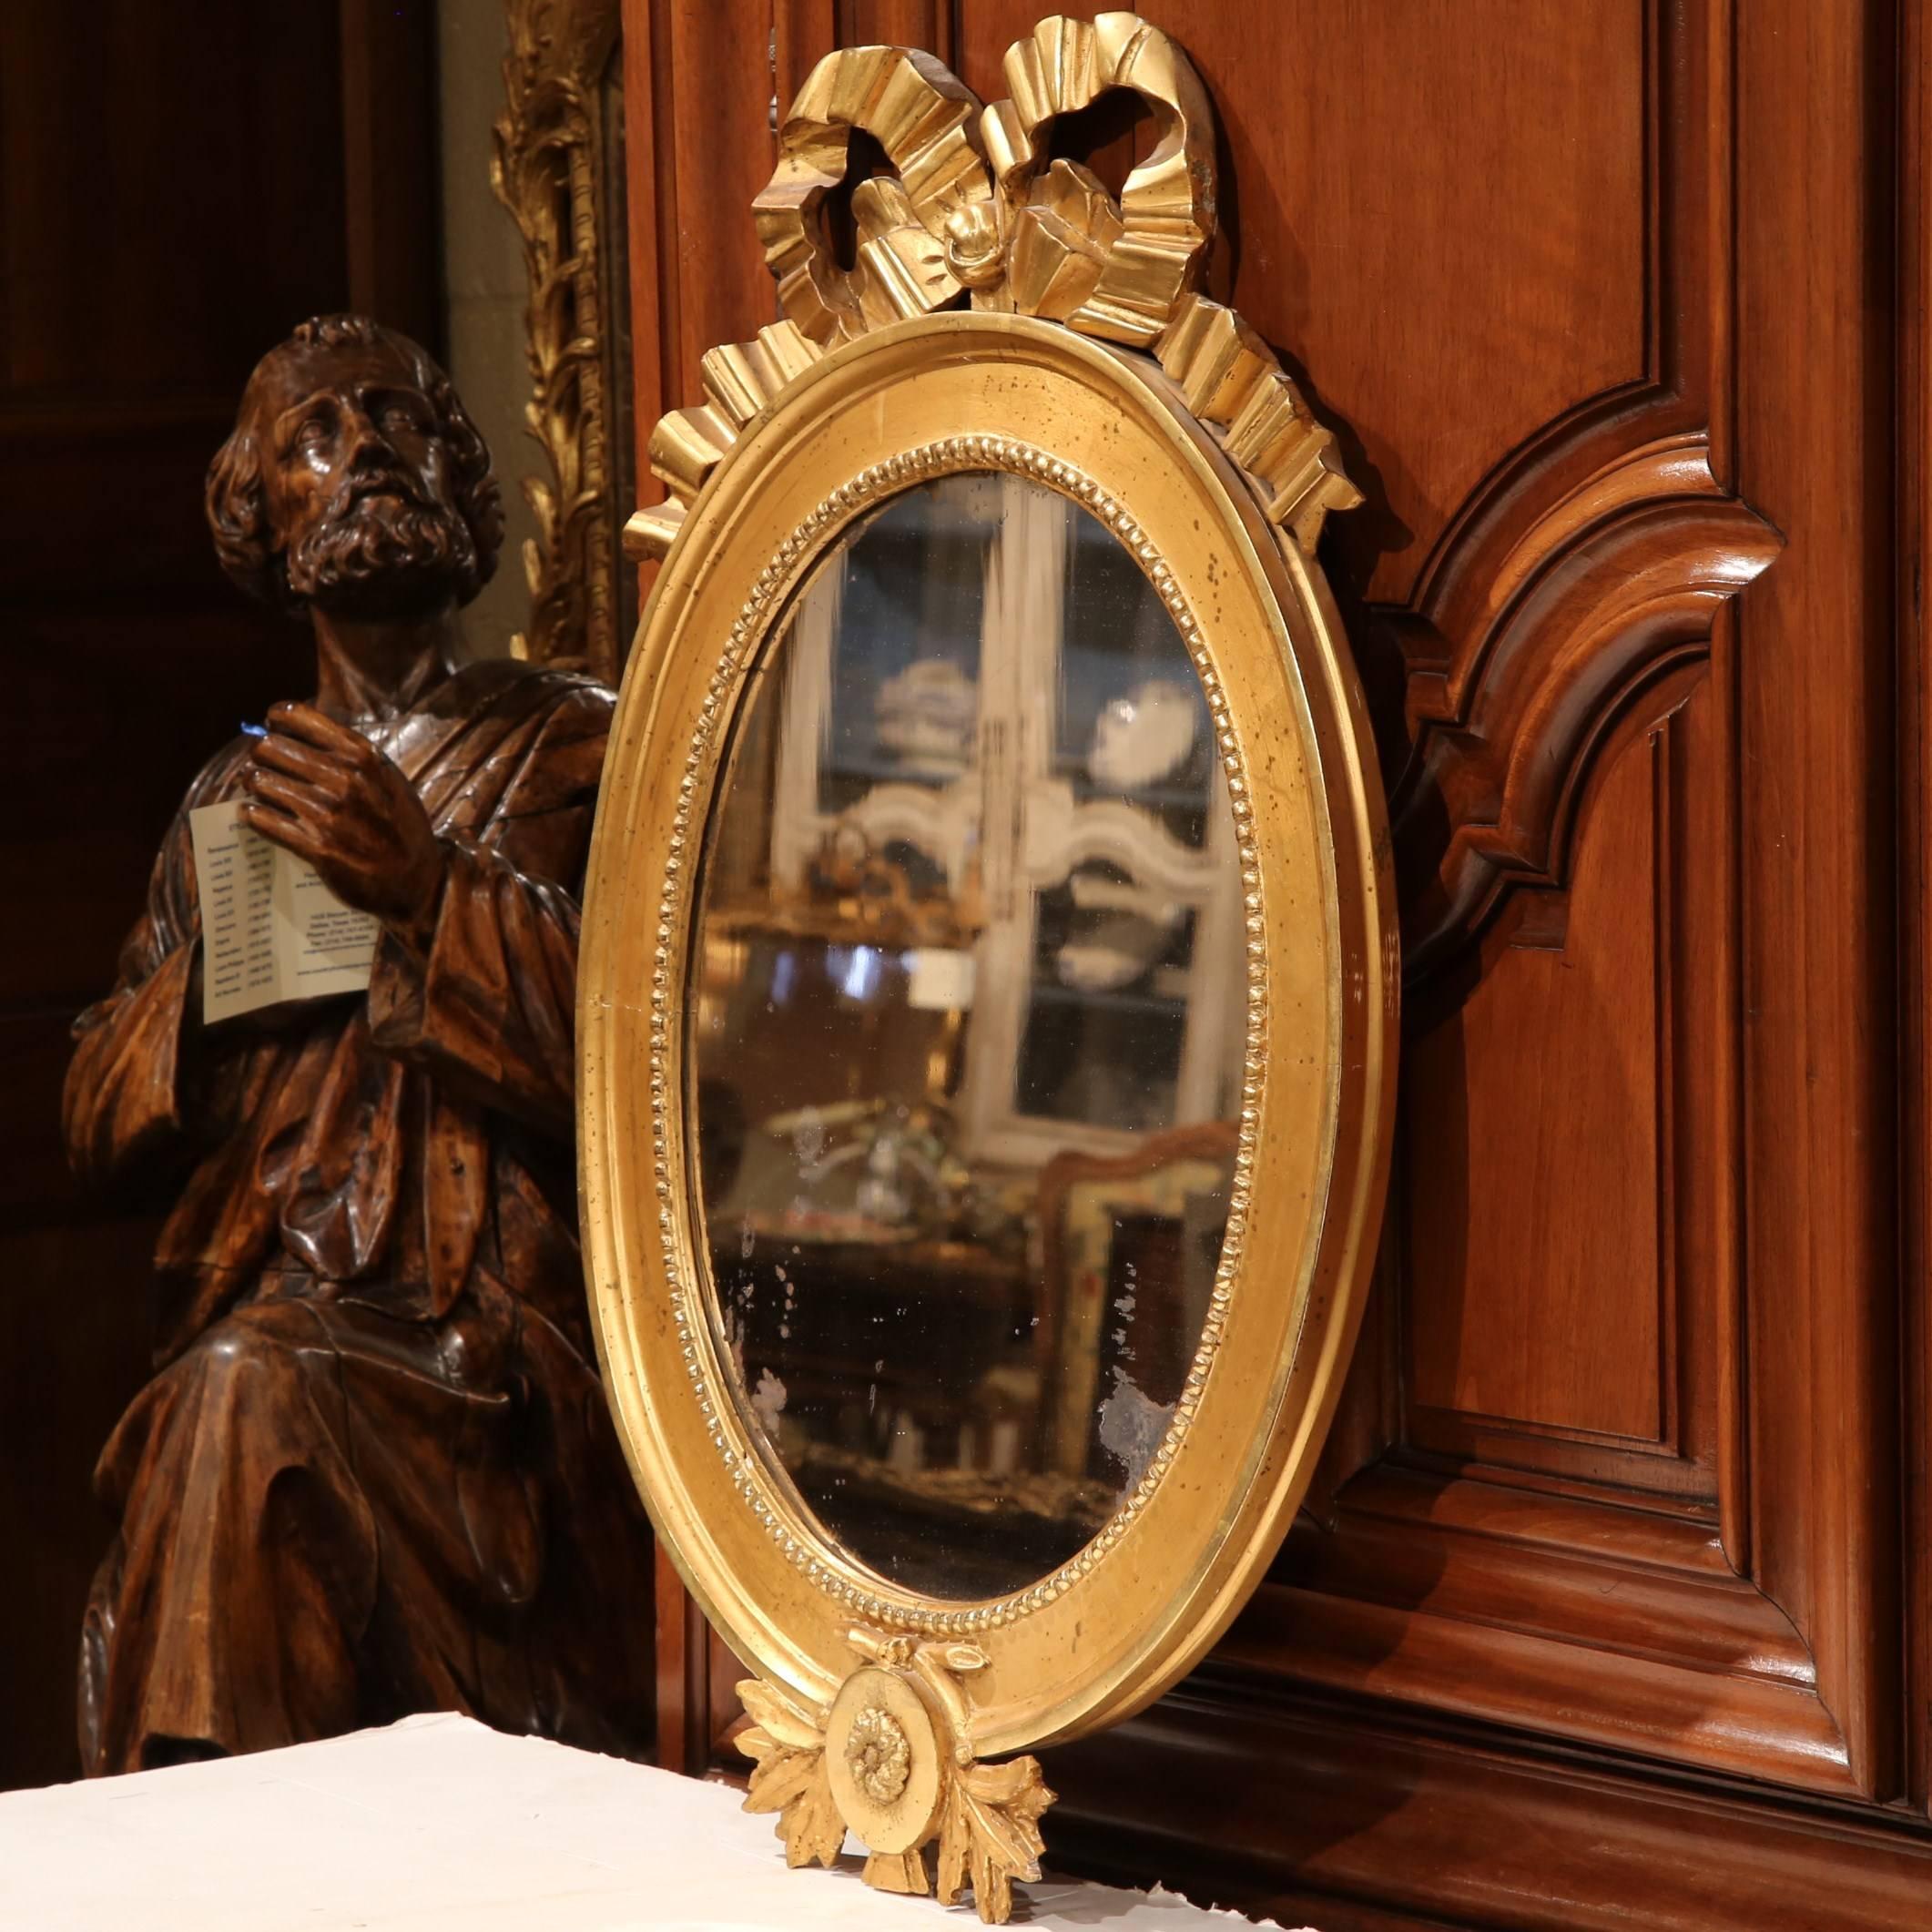 Delicate and beautiful, this oval mirror would make a wonderful addition to a home of any style. Crafted in France, circa 1780, the antique mirror still has its original glass mirror. On the frame of the mirror is an intricately carved medallion,